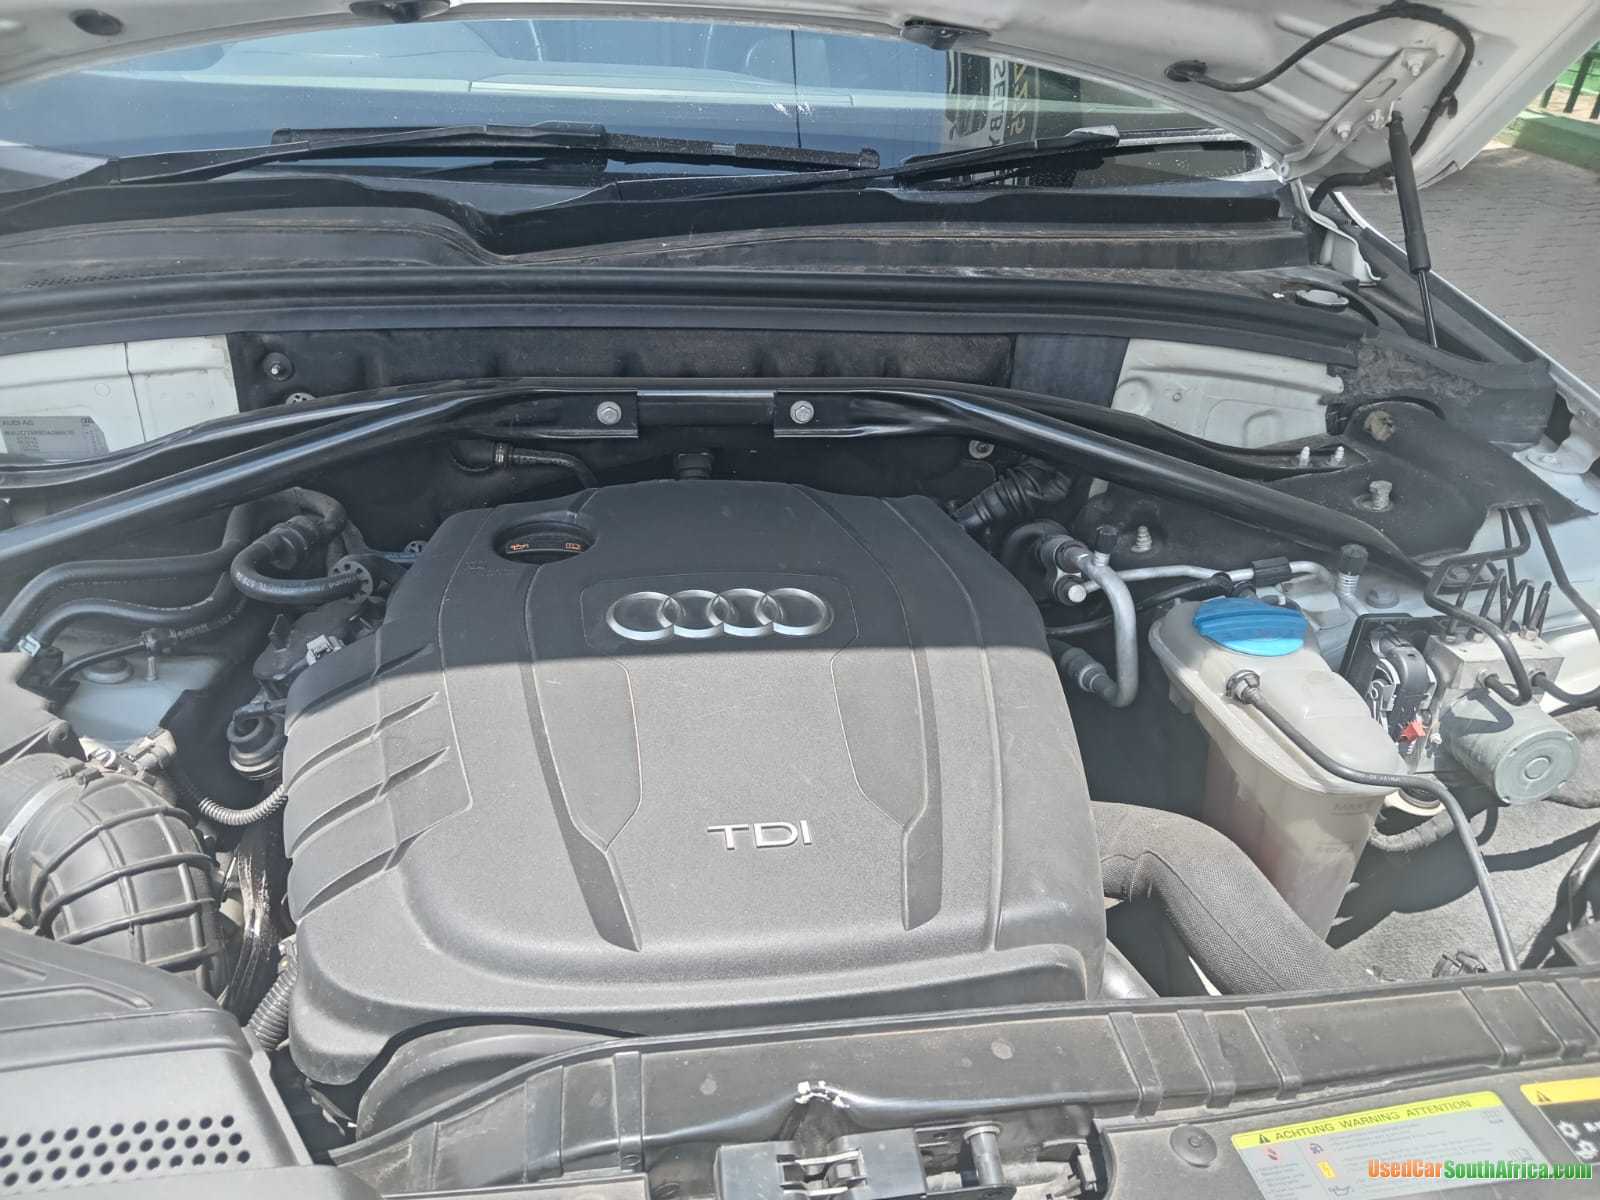 2013 Audi Q5 USED AUDI Q5 FOR SALE used car for sale in Johannesburg South Gauteng South Africa - OnlyCars.co.za